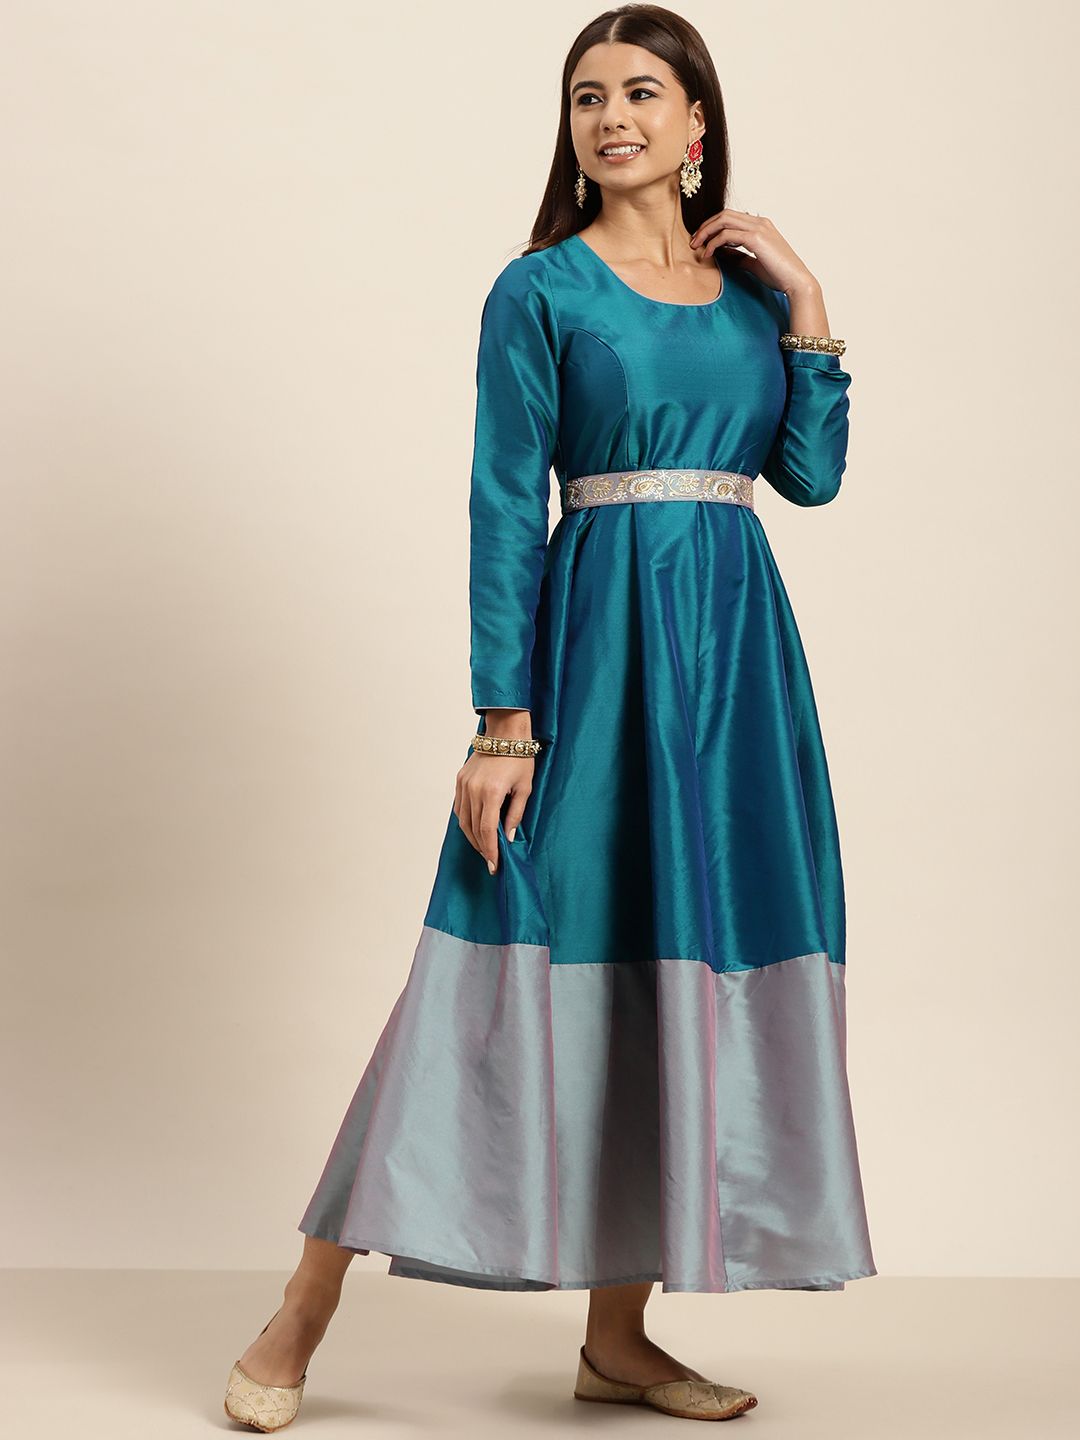 Shae by SASSAFRAS Women Tranquil Teal Colourblocked Dress Price in India